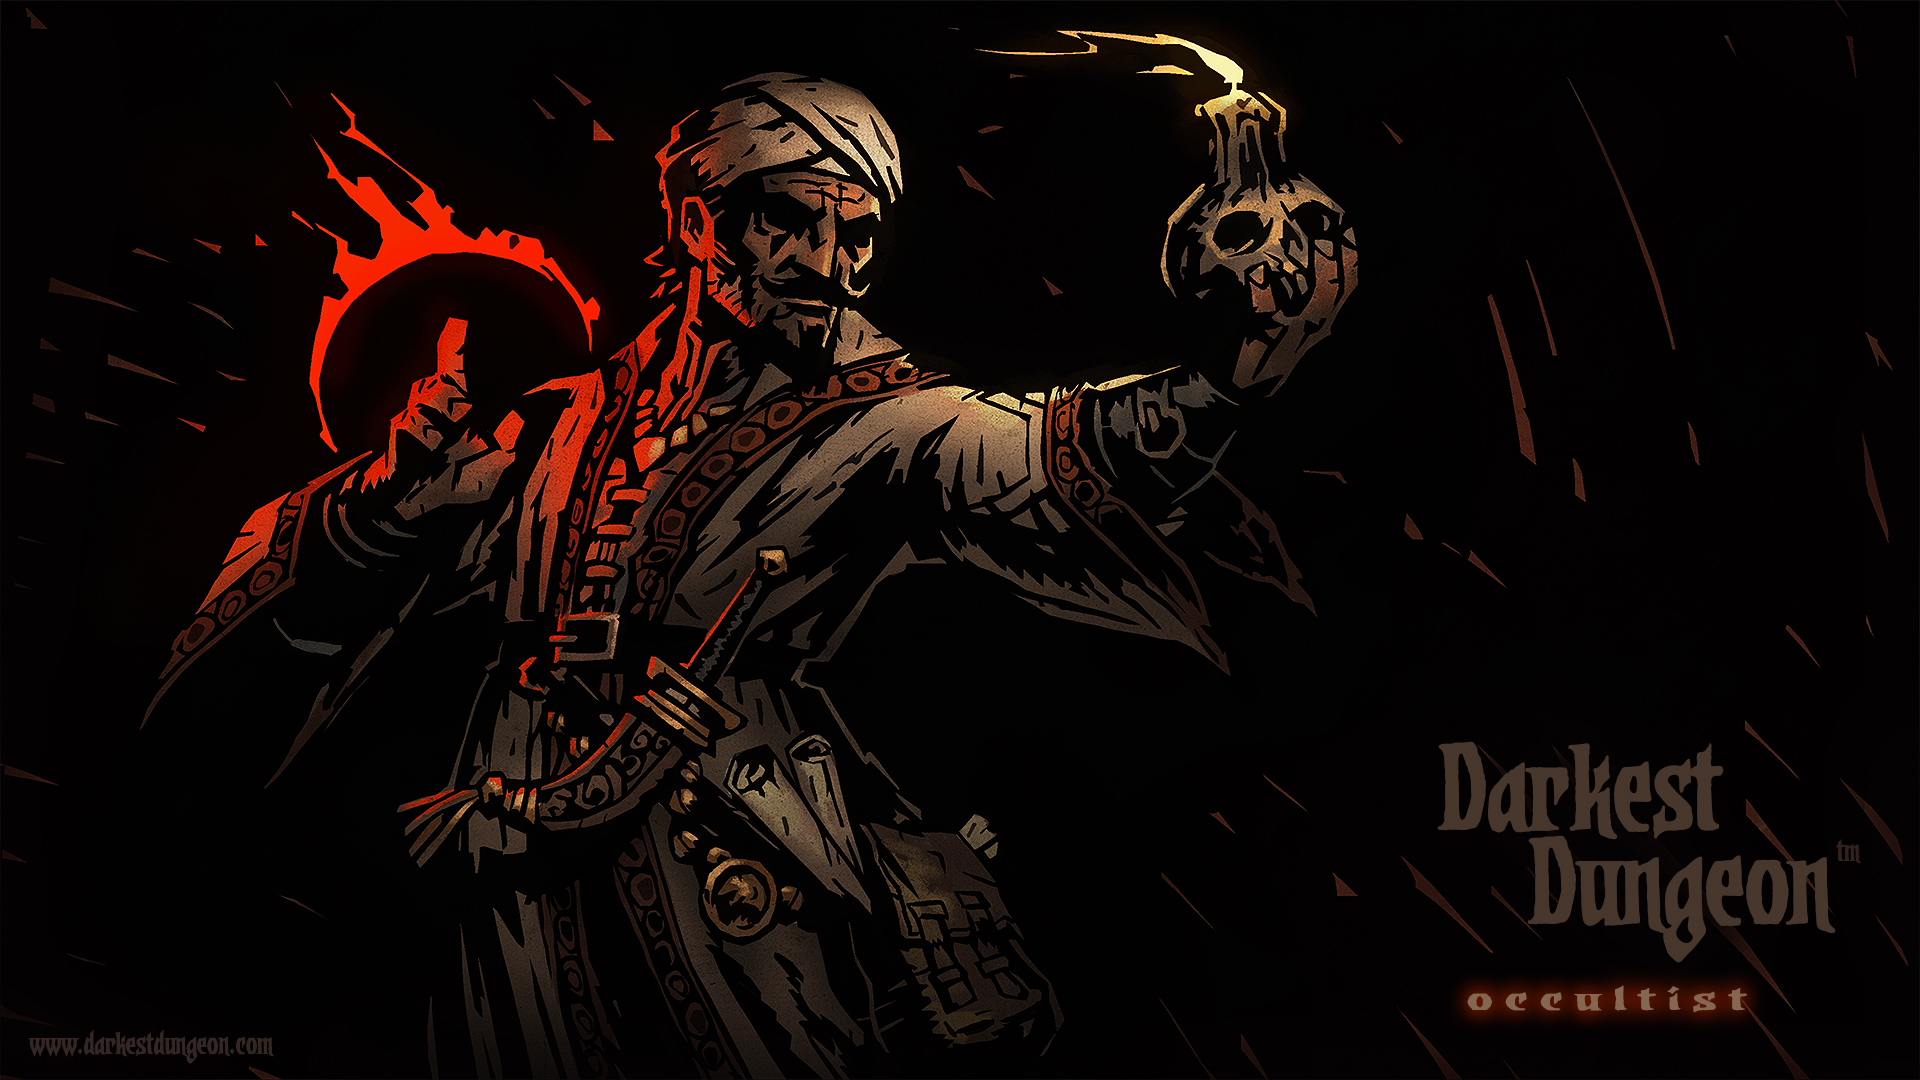 darkest dungeon wallpaper,darkness,pc game,illustration,fictional character,games